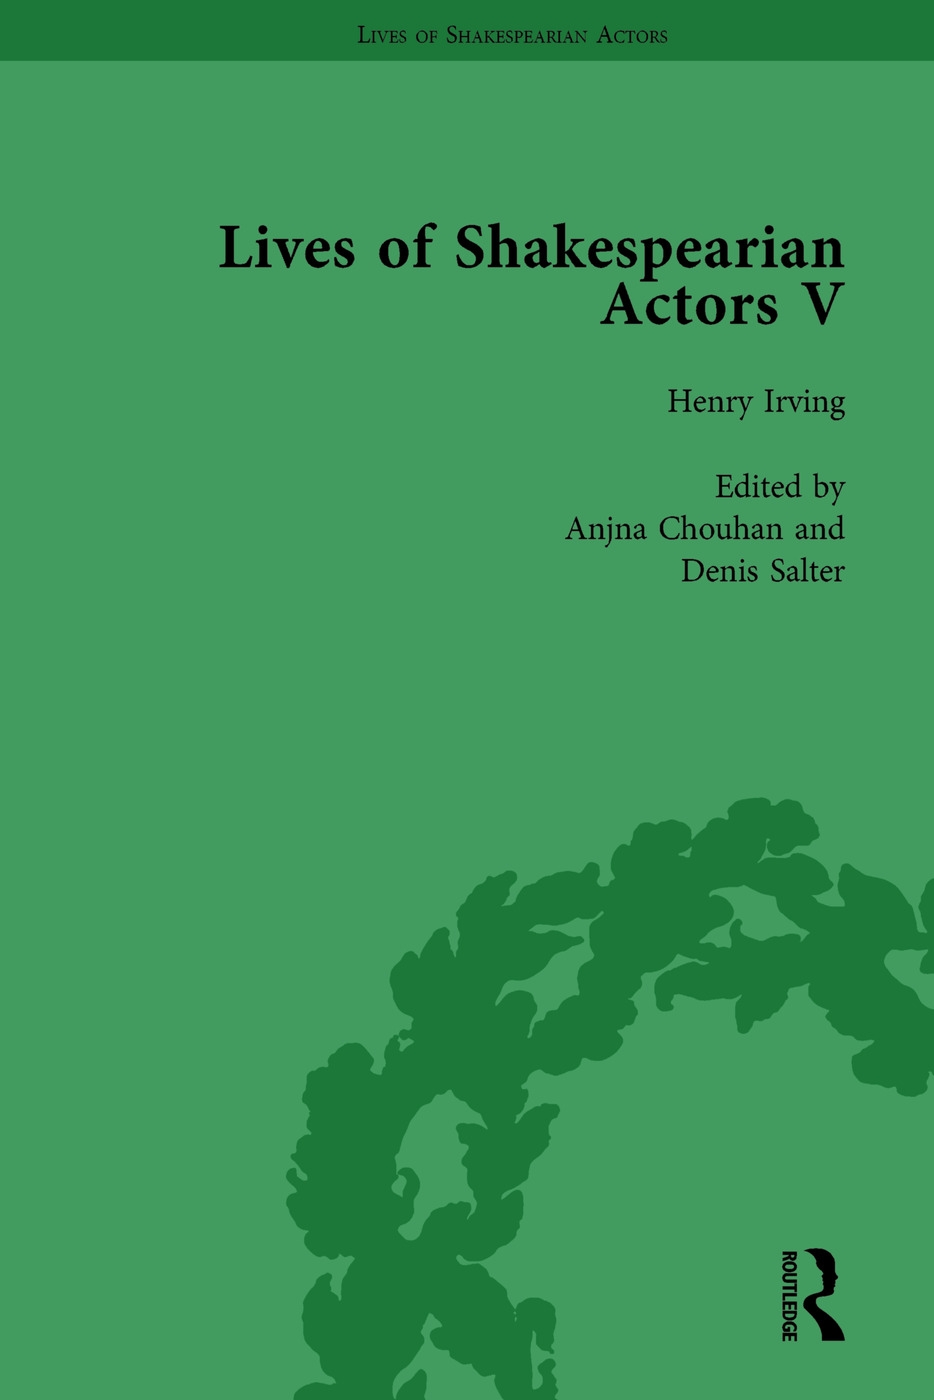 Lives of Shakespearian Actors, Part I, Volume 1: David Garrick, Charles Macklin and Margaret Woffington by Their Contemporaries